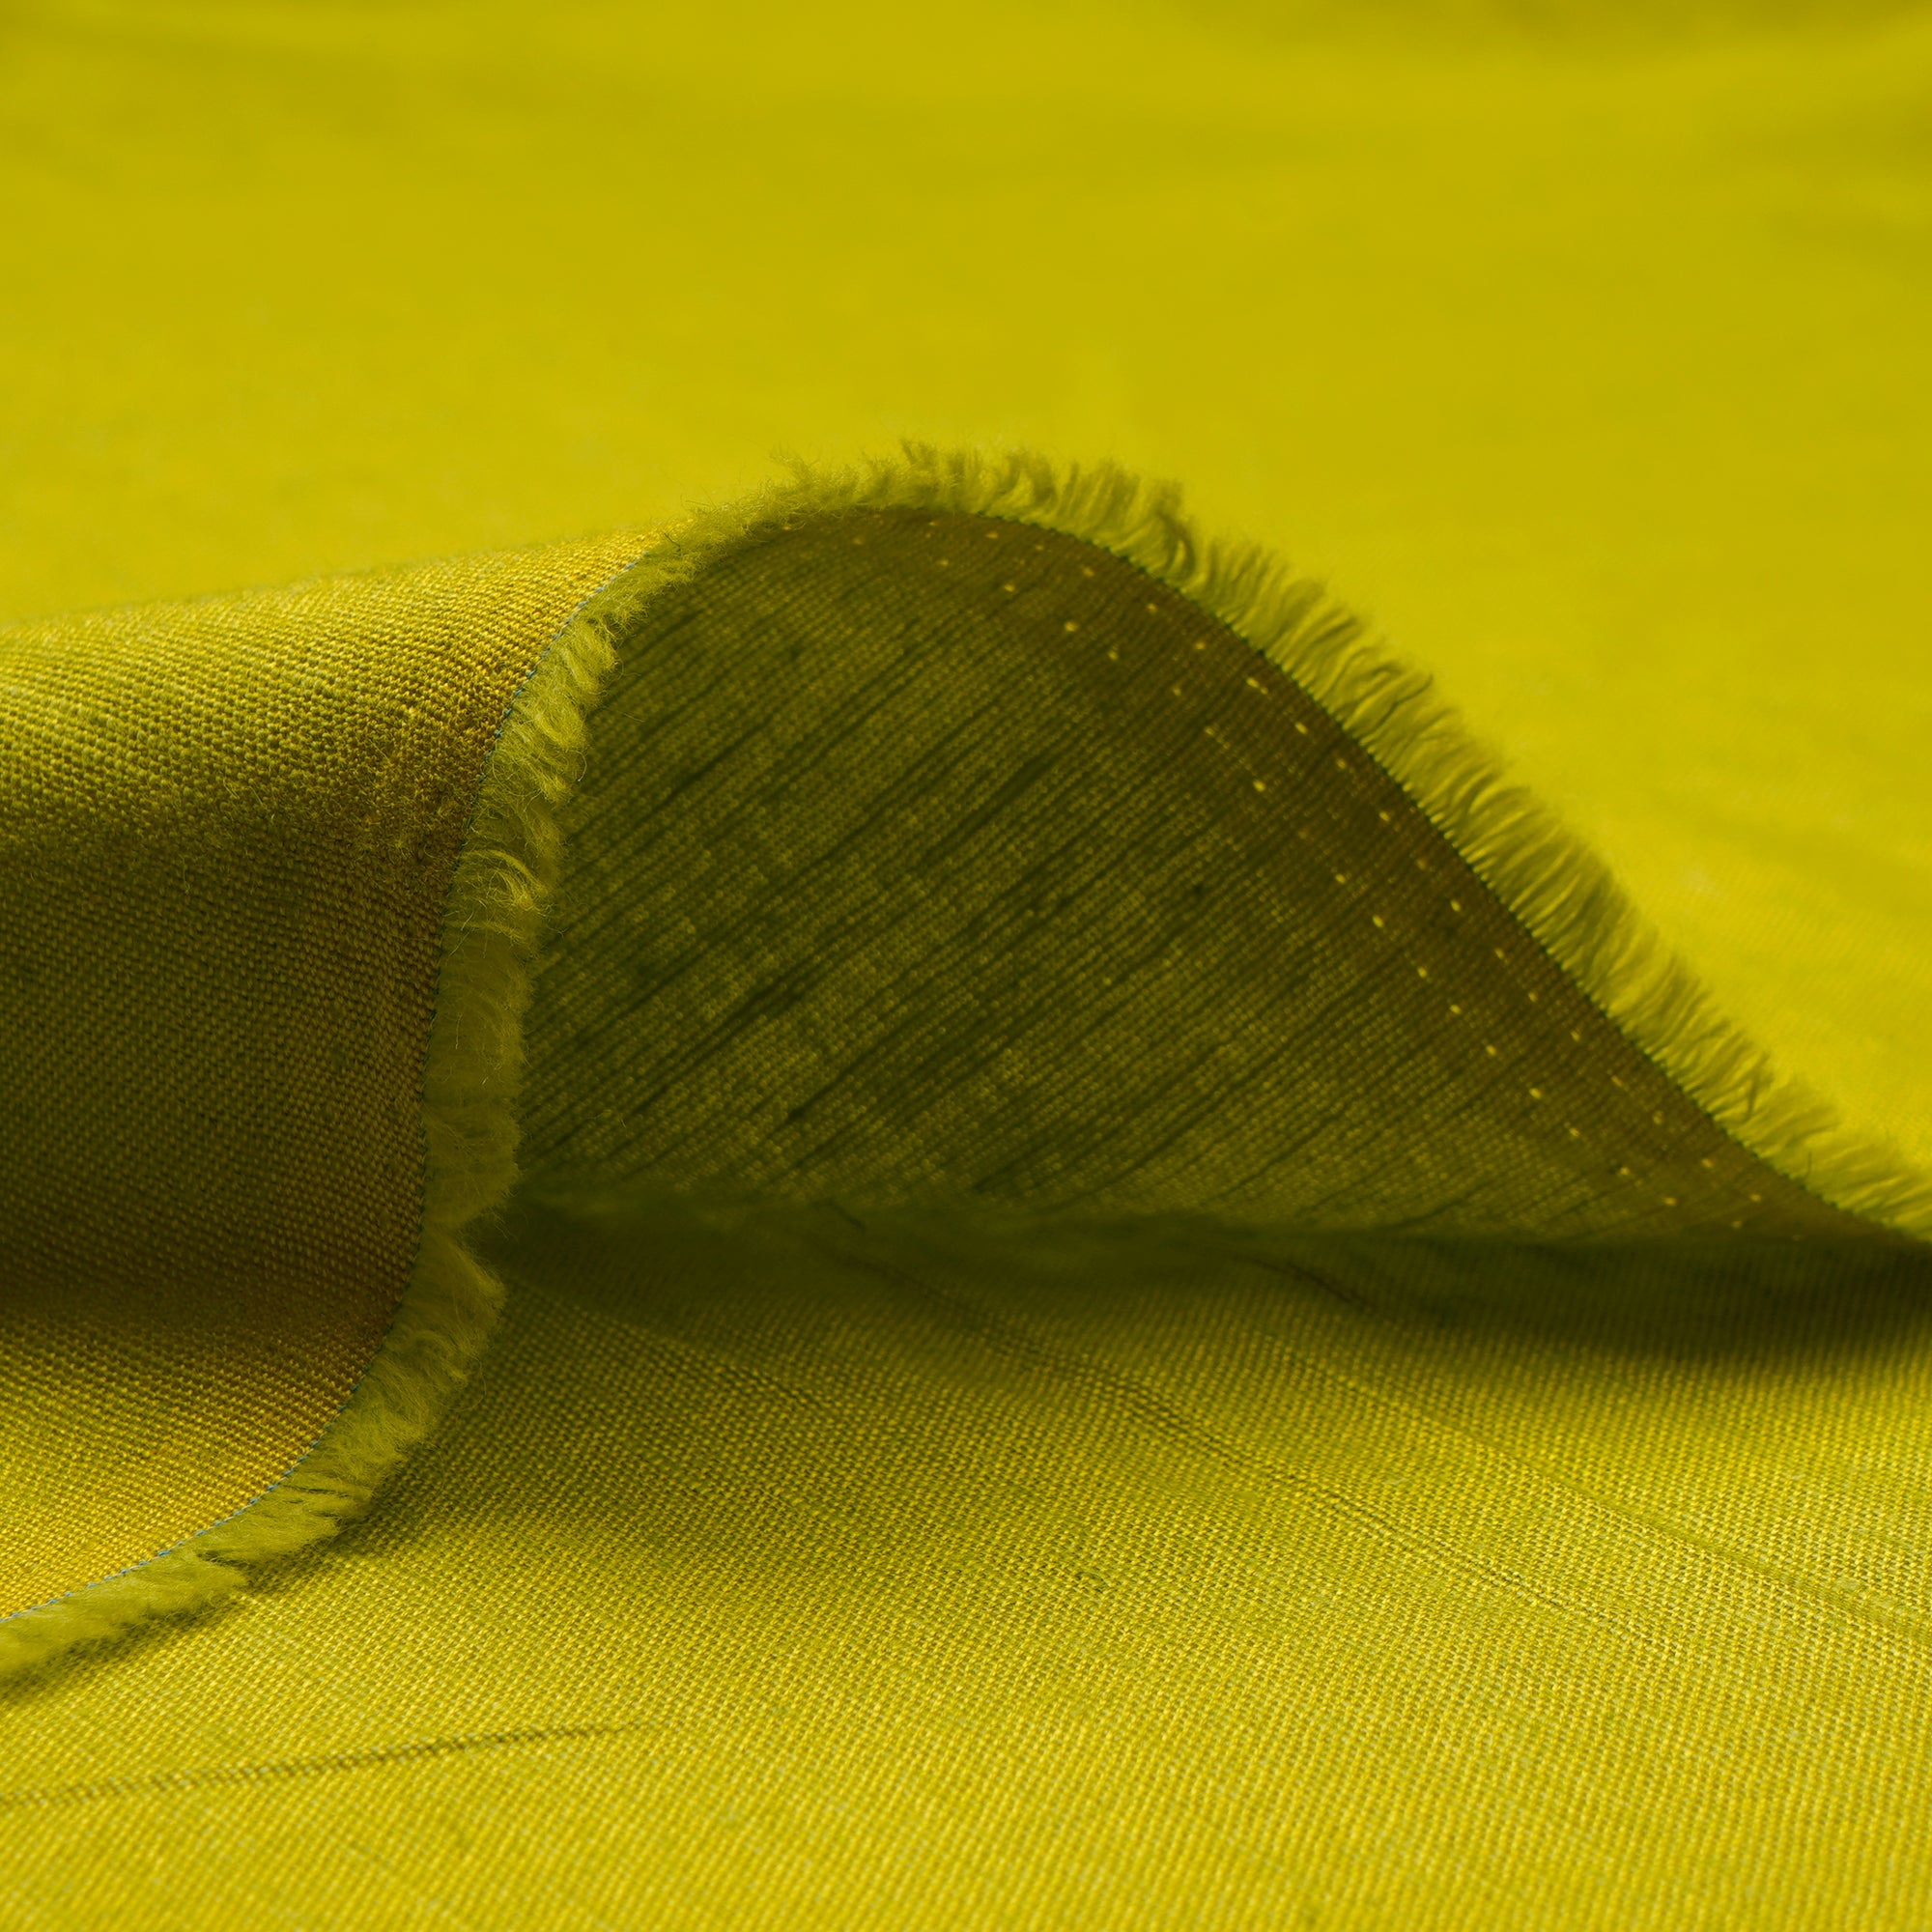 Lime Green Rayon South Cotton Fabric